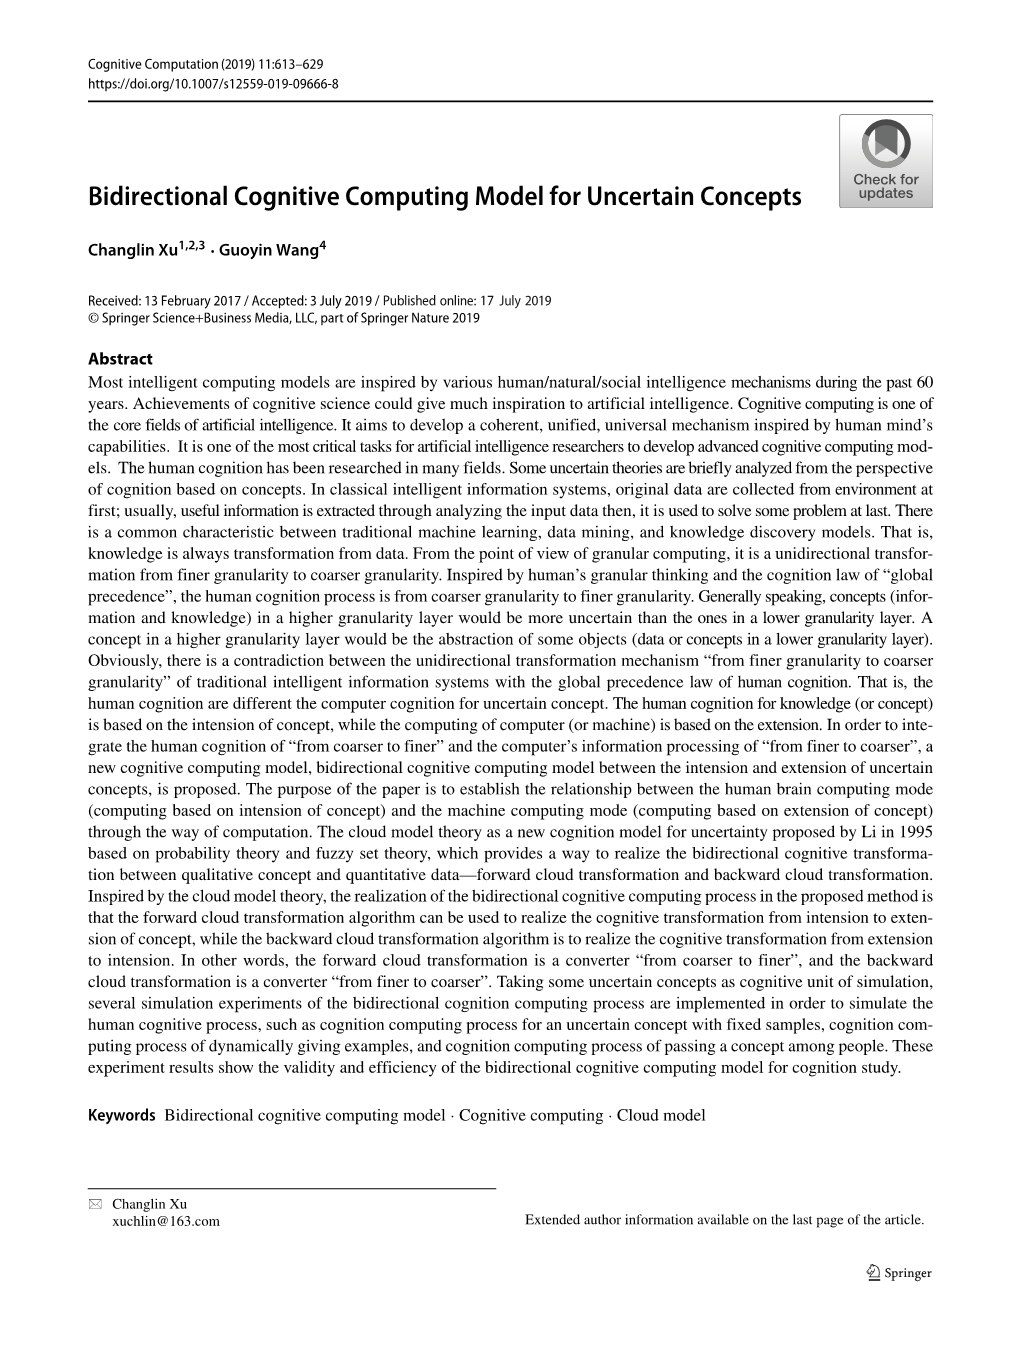 Bidirectional Cognitive Computing Model for Uncertain Concepts